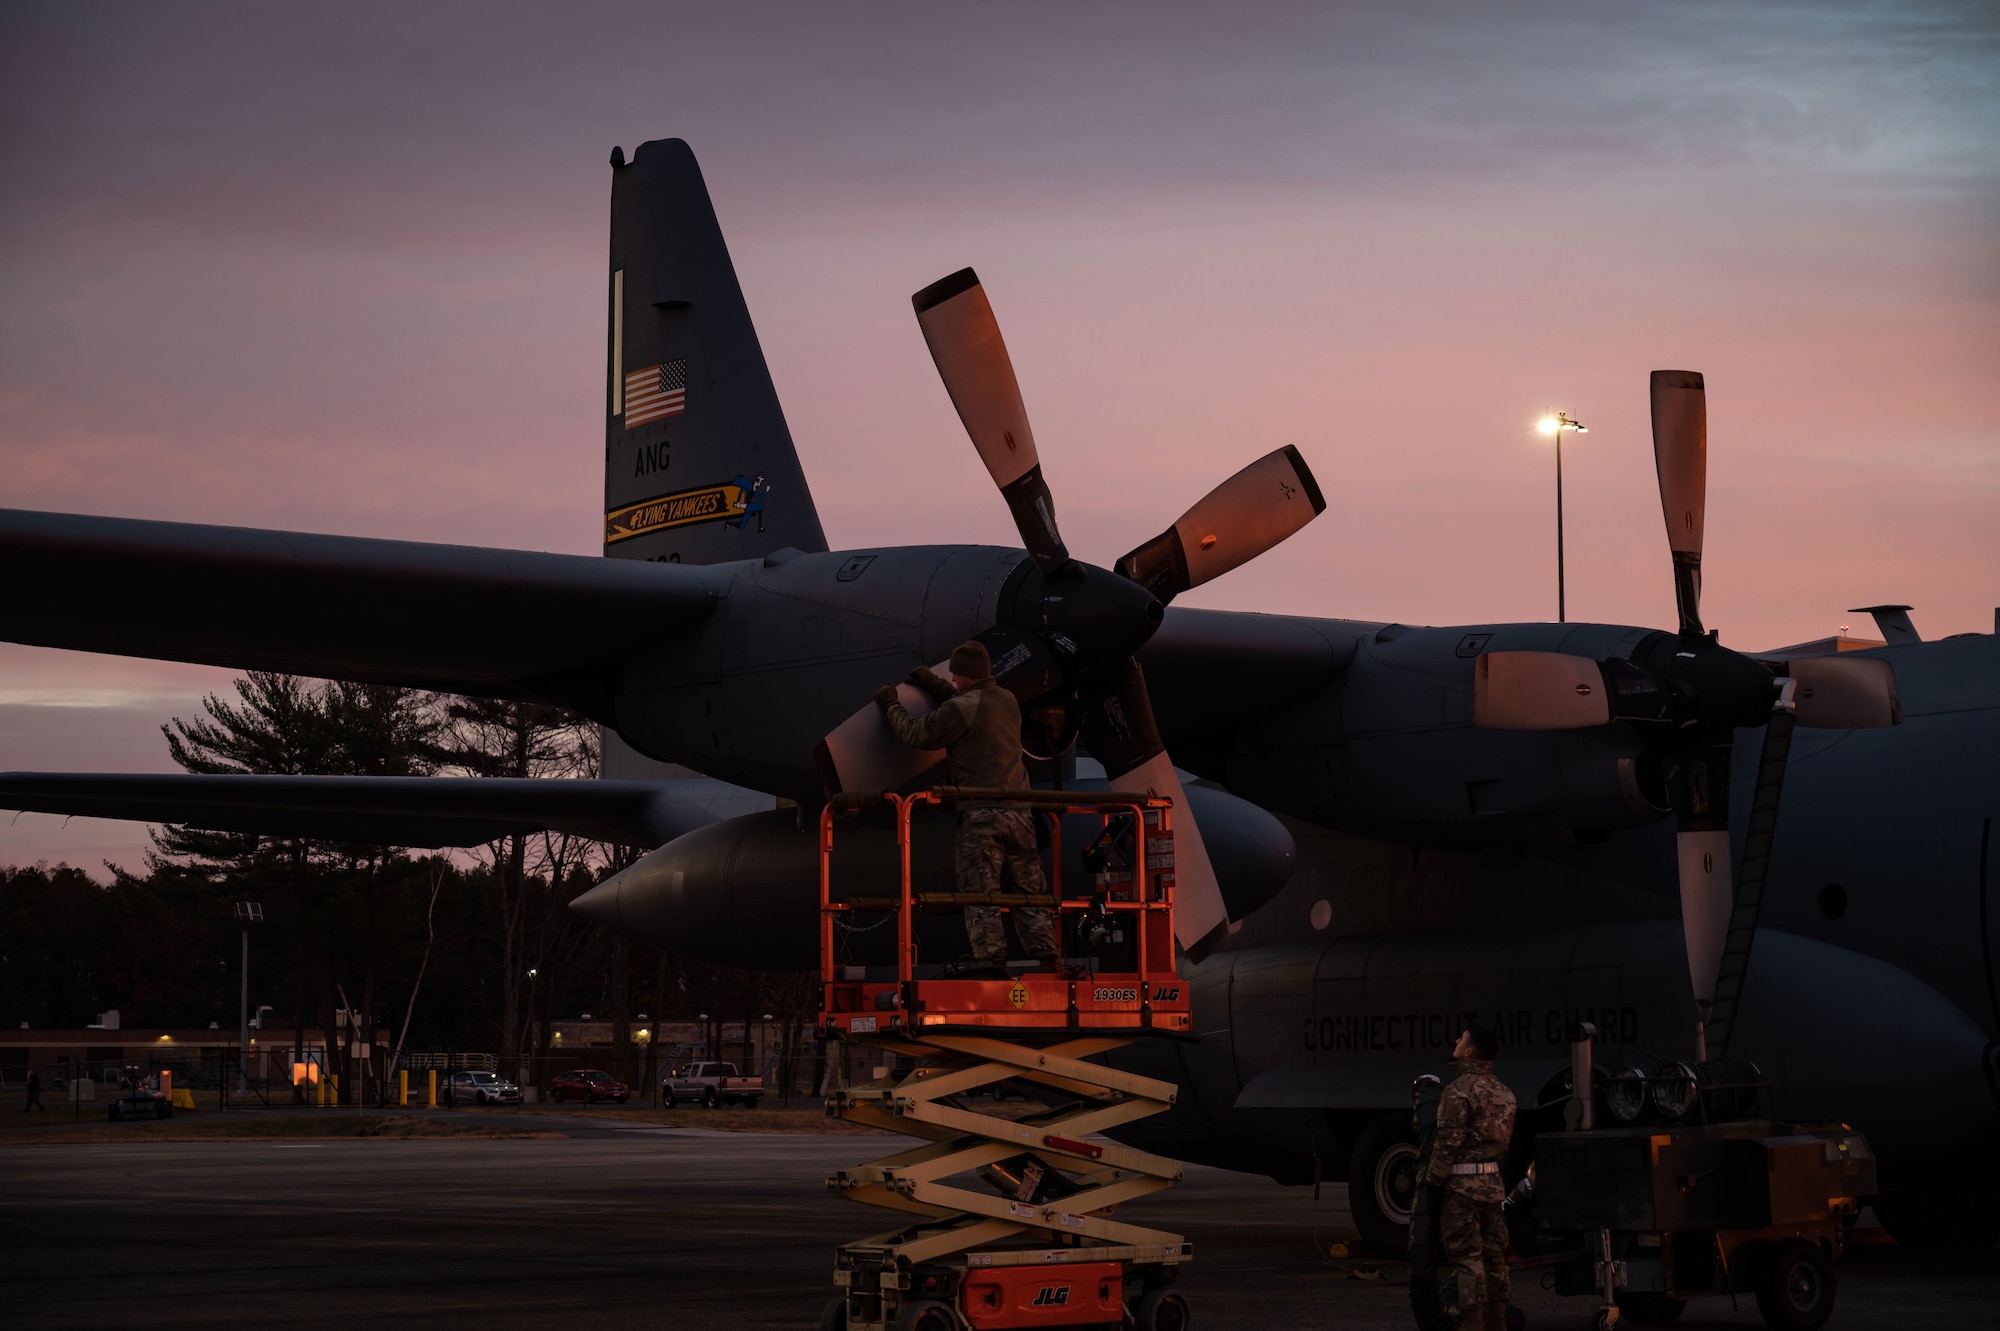 Members of the 103rd Maintenance Group inspect the propeller of a C-130H Hercules aircraft, December 13, 2021, East Granby, Connecticut. The maintainers began preparing the aircraft for flight at sunrise. (U.S. Air National Guard photo by Master Sgt. Tamara R. Dabney)